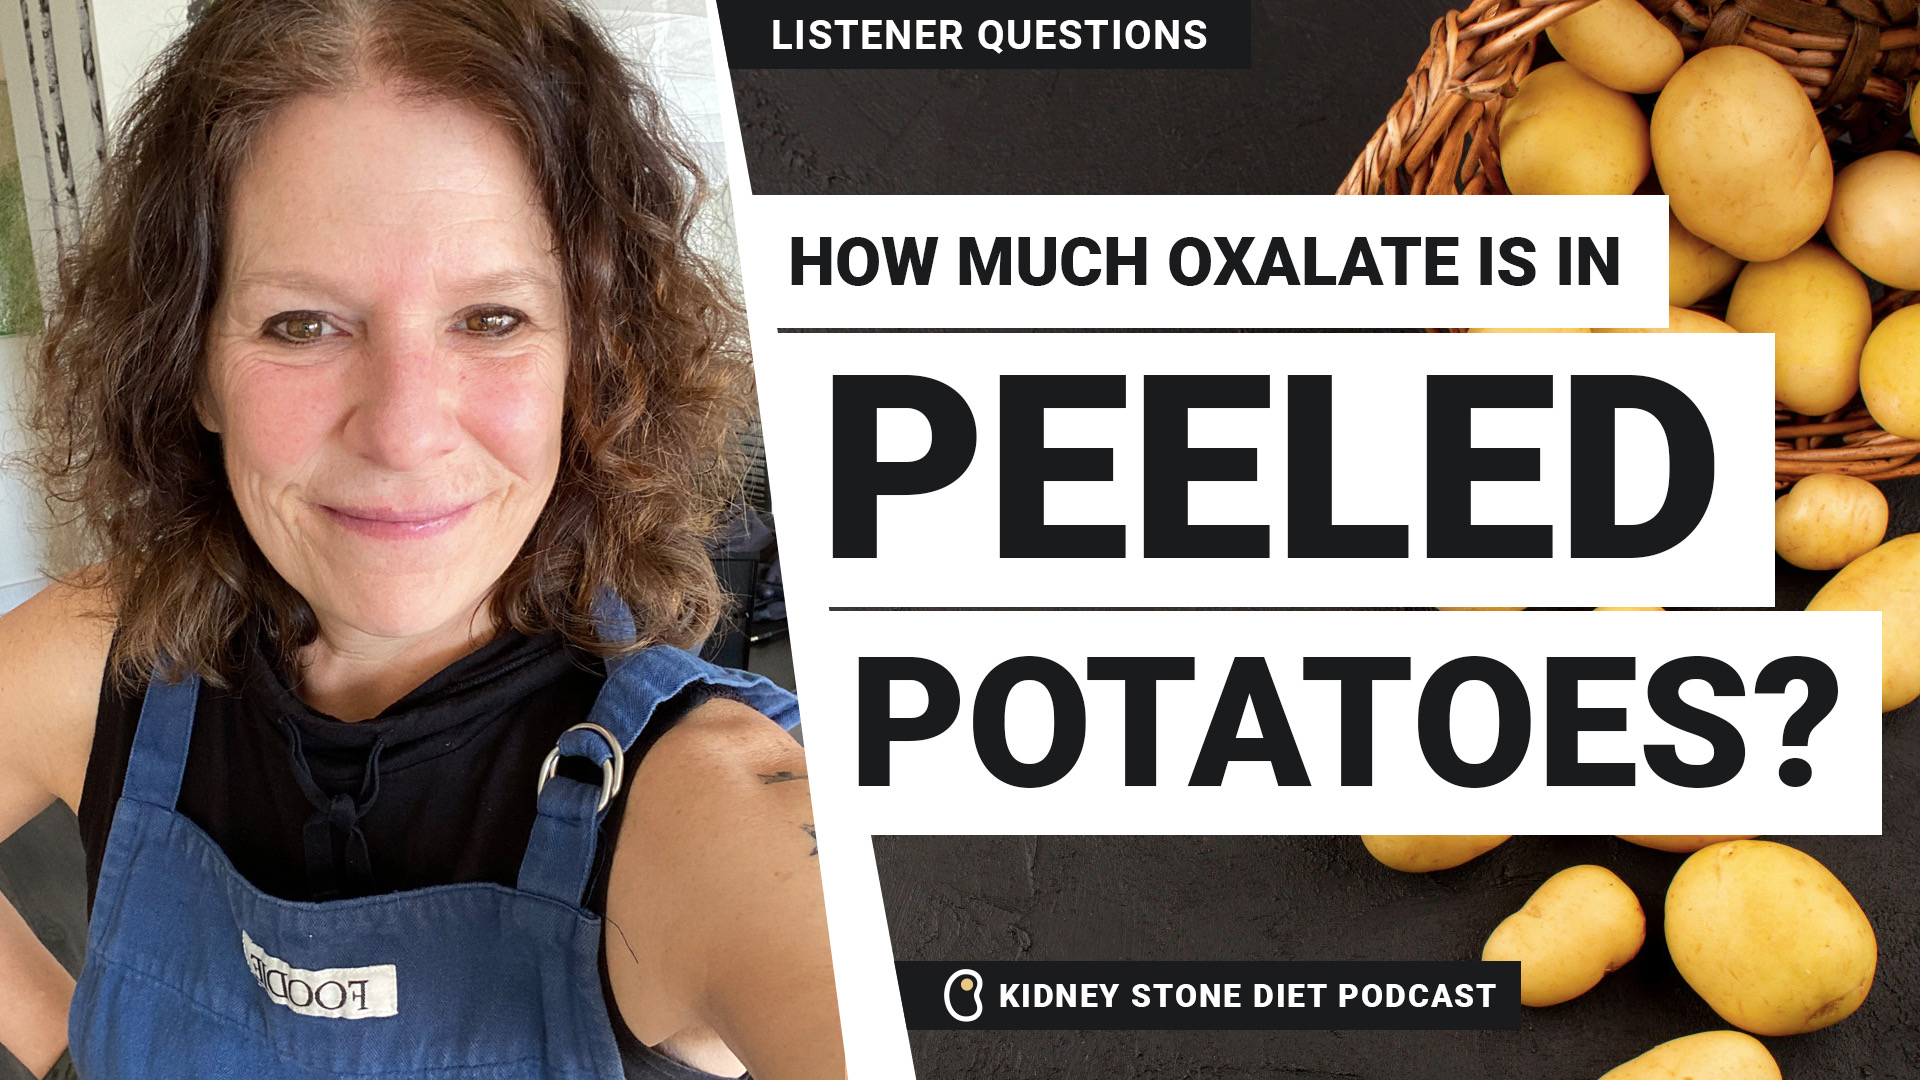 How much oxalate is in peeled potatoes?